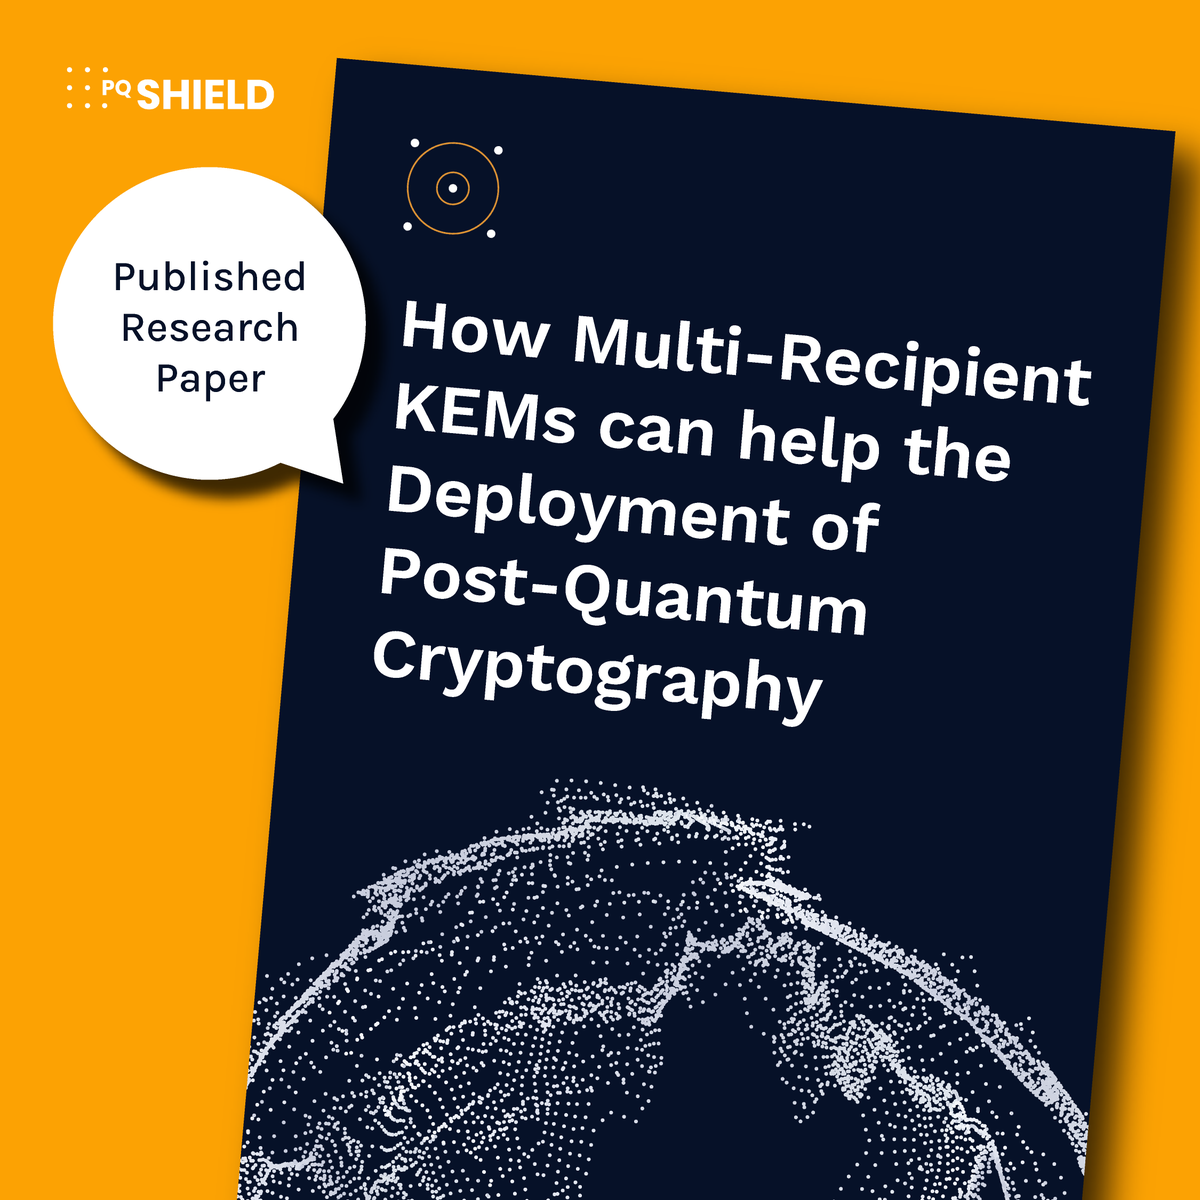 Today Thomas Prest is giving a presentation at the @NIST Post-Quantum #Cryptography workshop to advocate for the standardisation of multi-recipient key encapsulation mechanisms, or mKEMs. We wrote a paper on it here: hubs.li/Q02sFPLS0